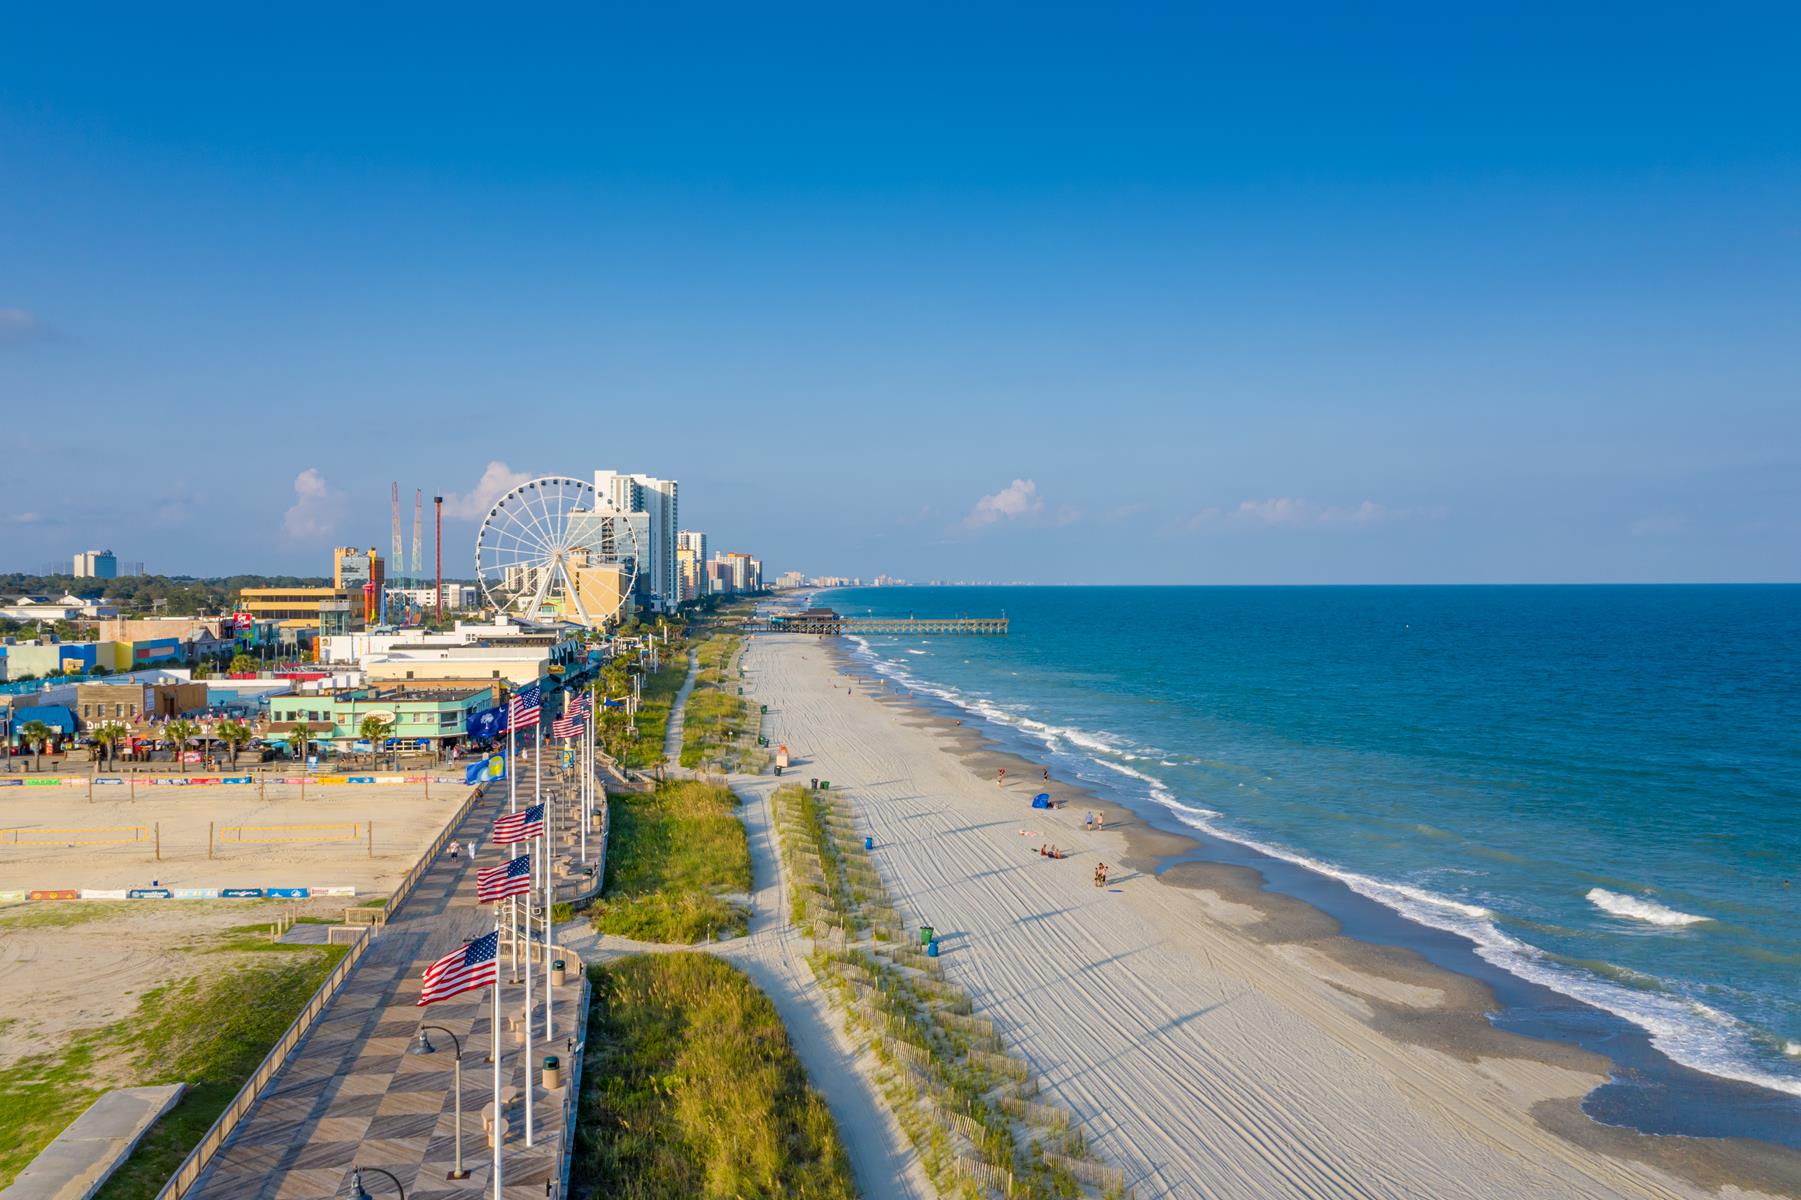 7 Reasons to Visit Myrtle Beach in 2021